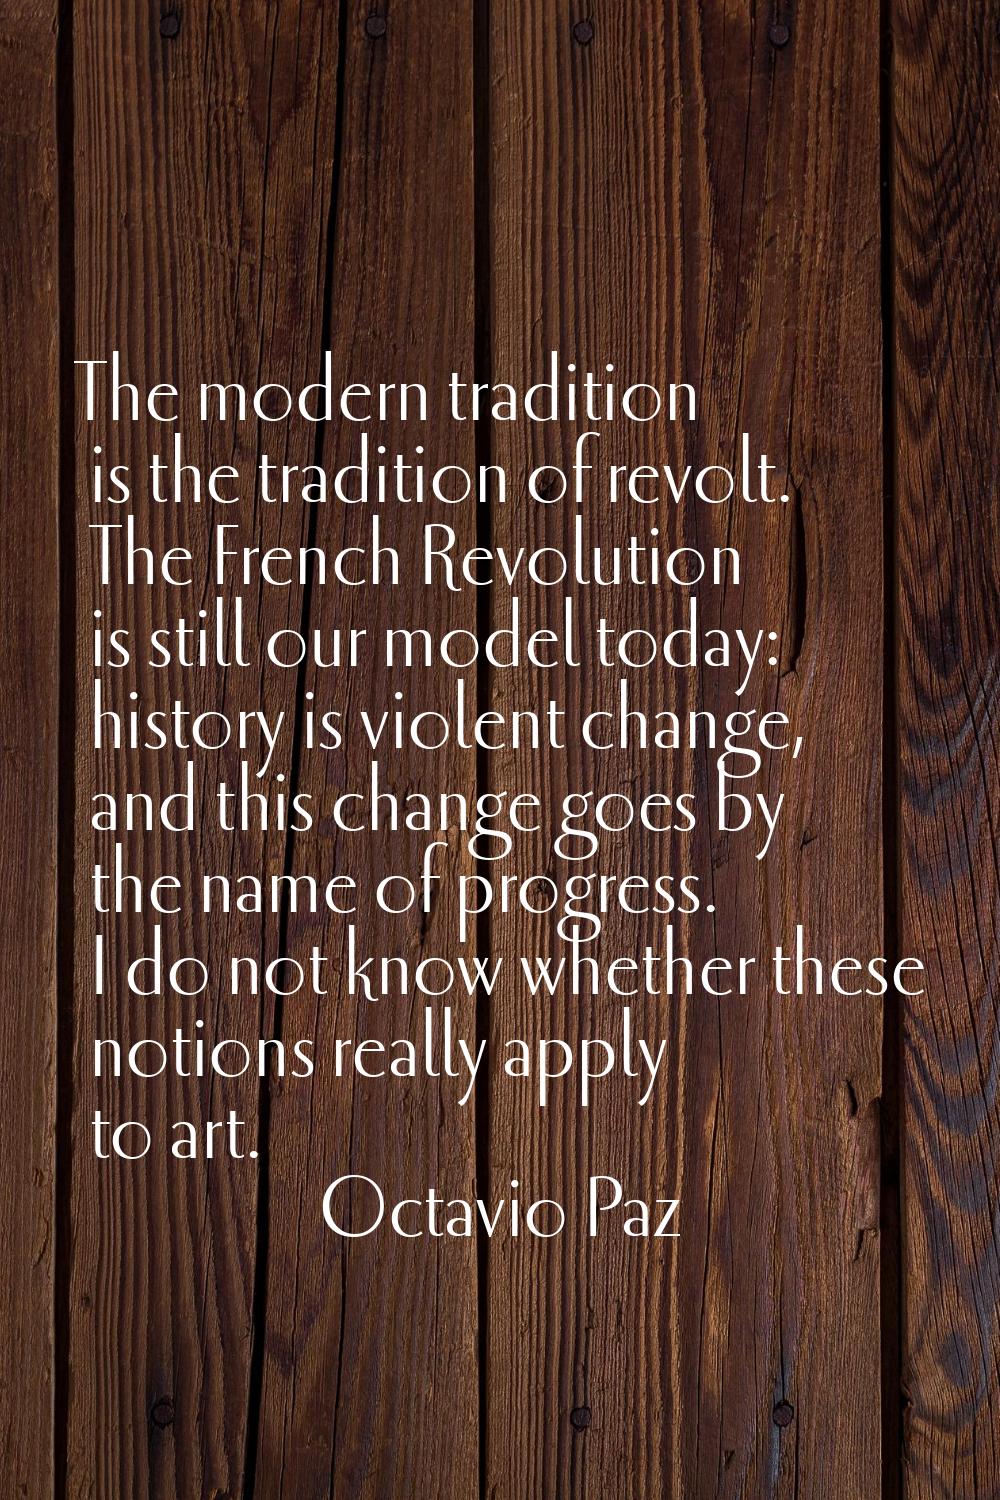 The modern tradition is the tradition of revolt. The French Revolution is still our model today: hi